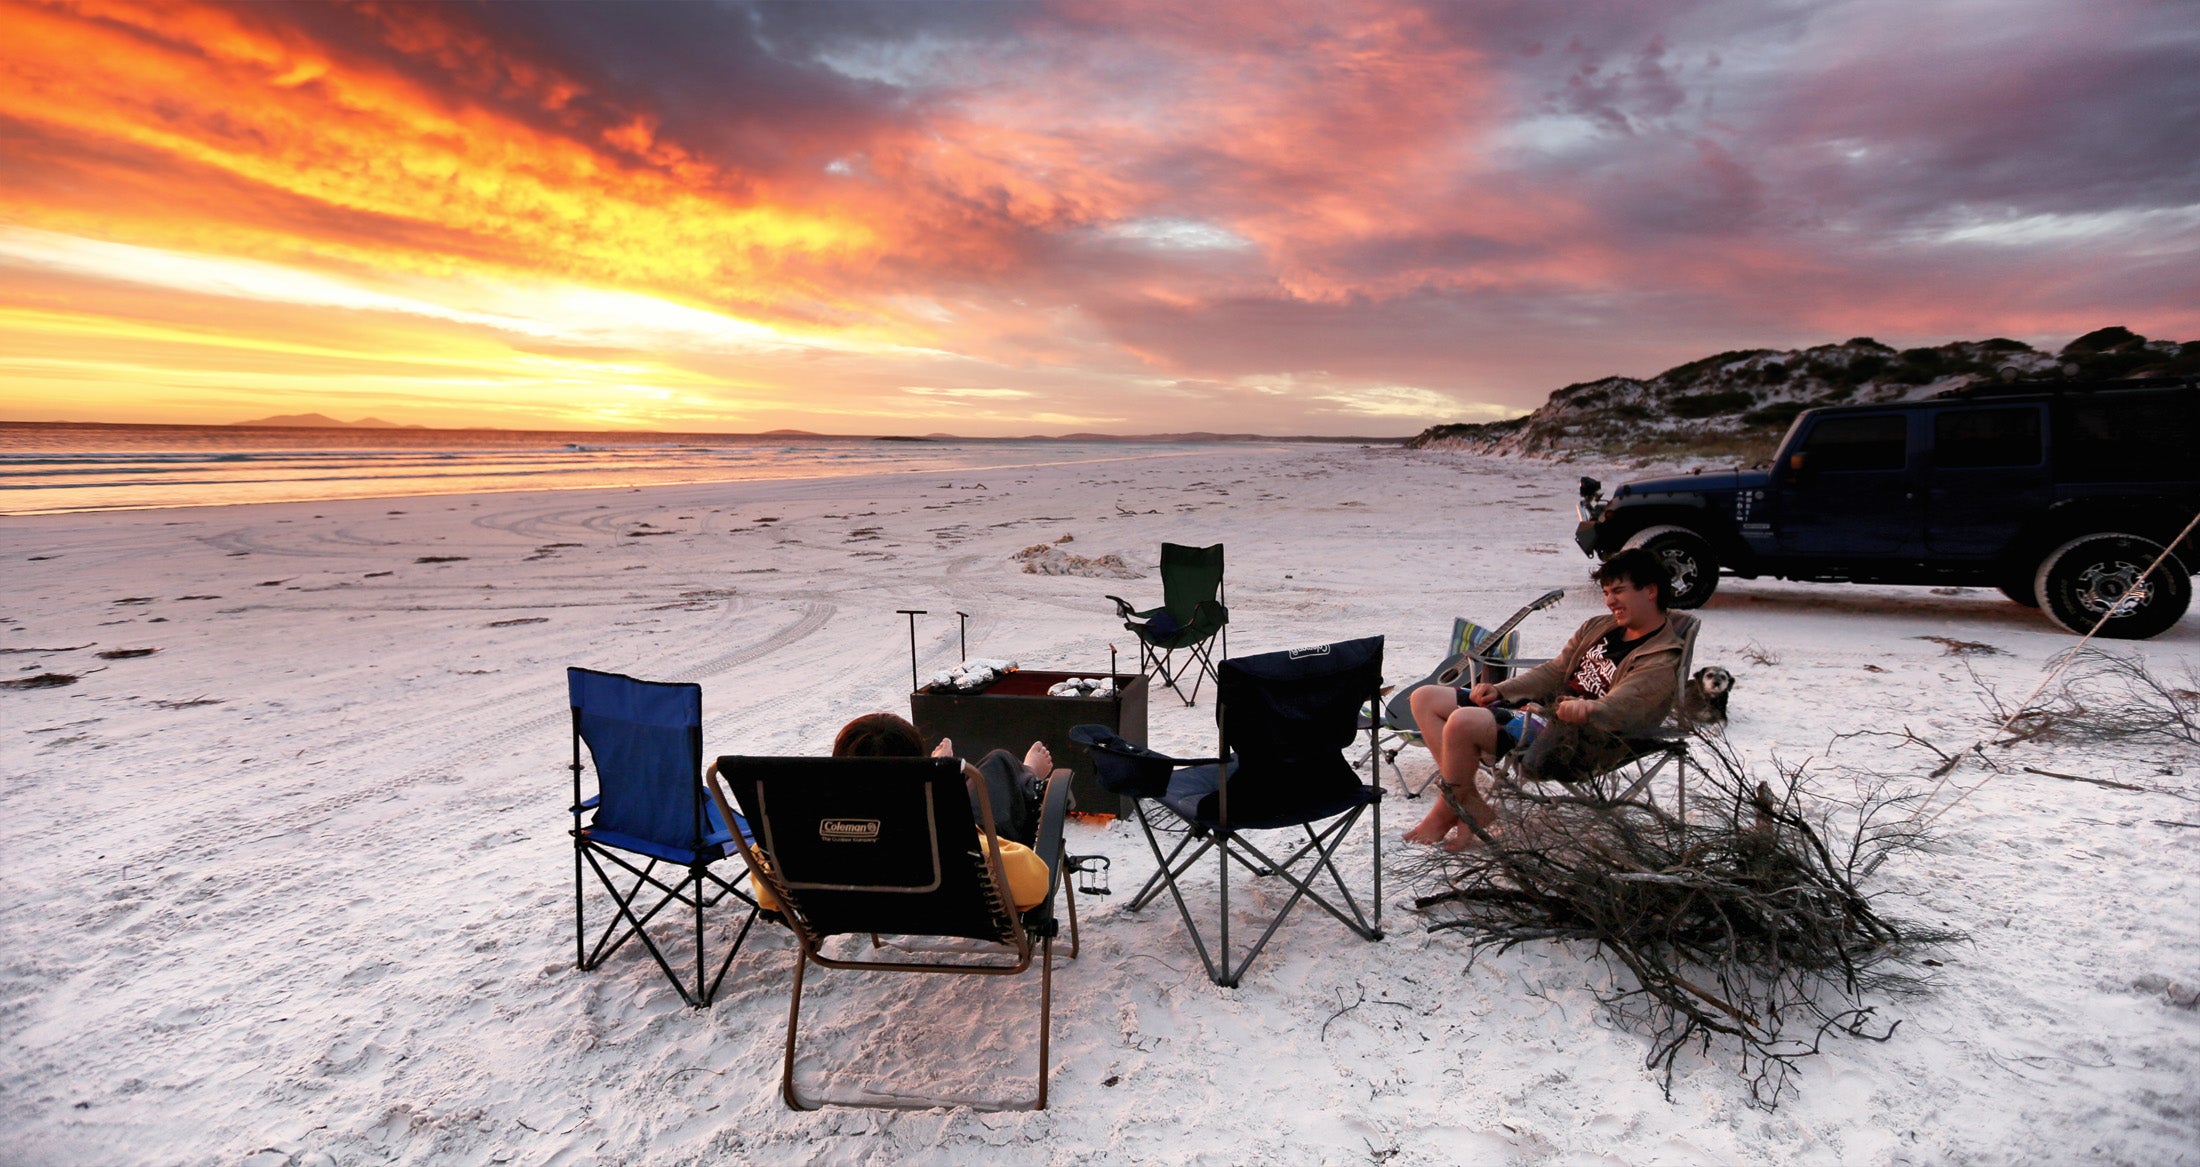 Beachside camping and campefires at night with an  Esperance Sunset.